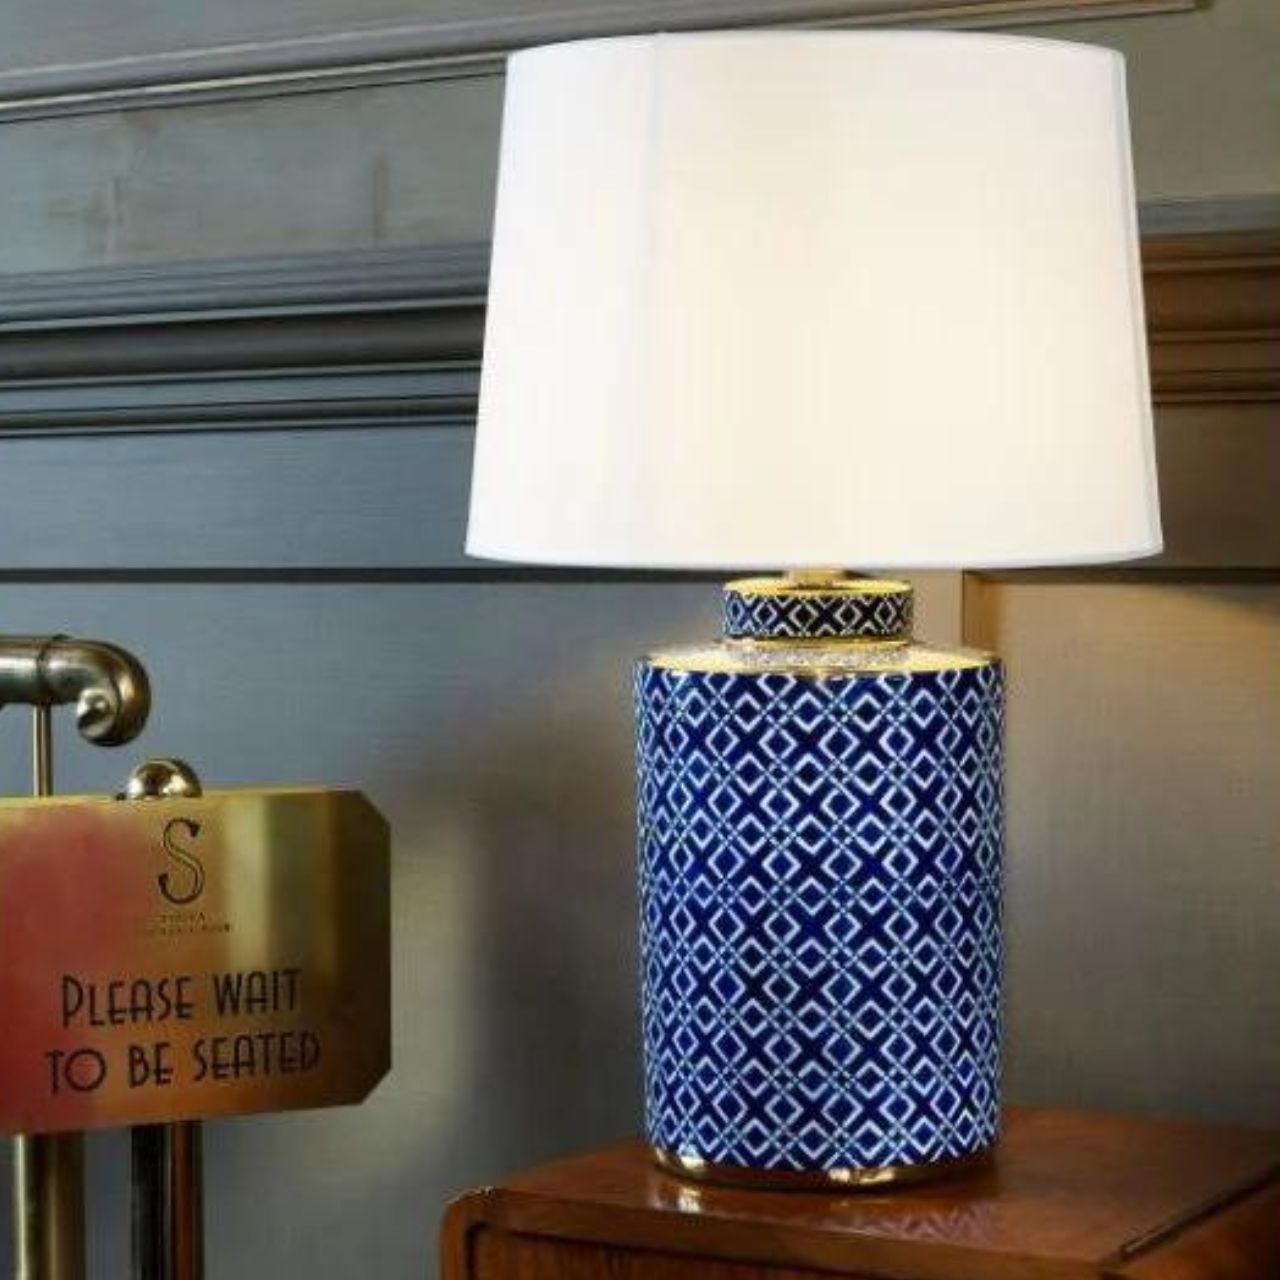 Mindy Brownes Marseille Lamp  Mindy Brownes Lamp - Gorgeous geometric blue and white styled lamp with brass base.